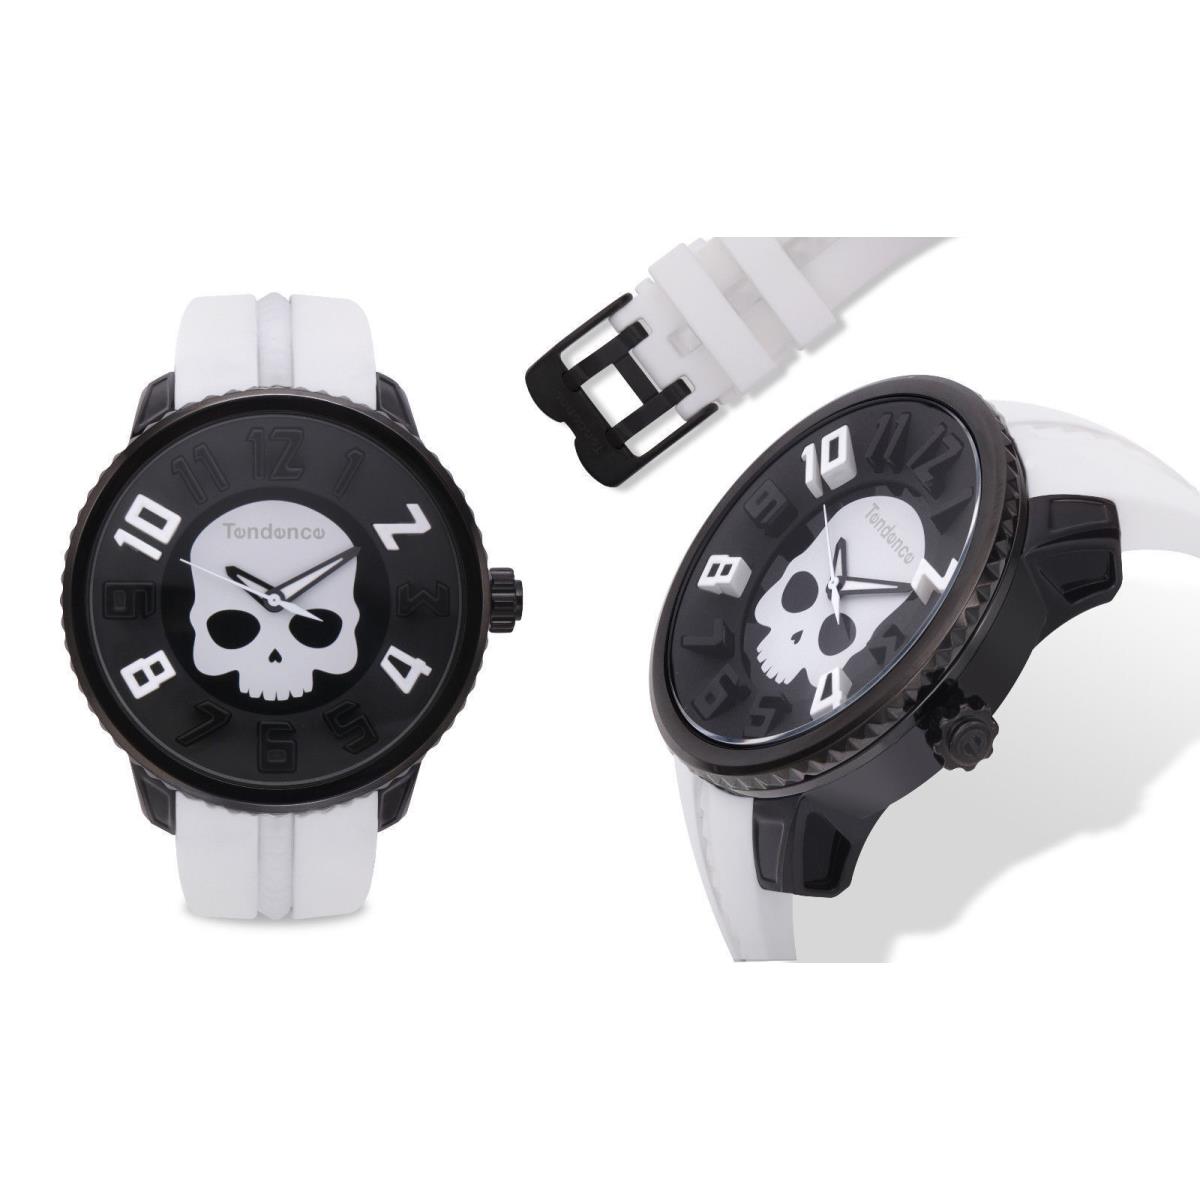 Tendence Gulliver Hydrogen Skull Watch 589.00 Available IN 2 